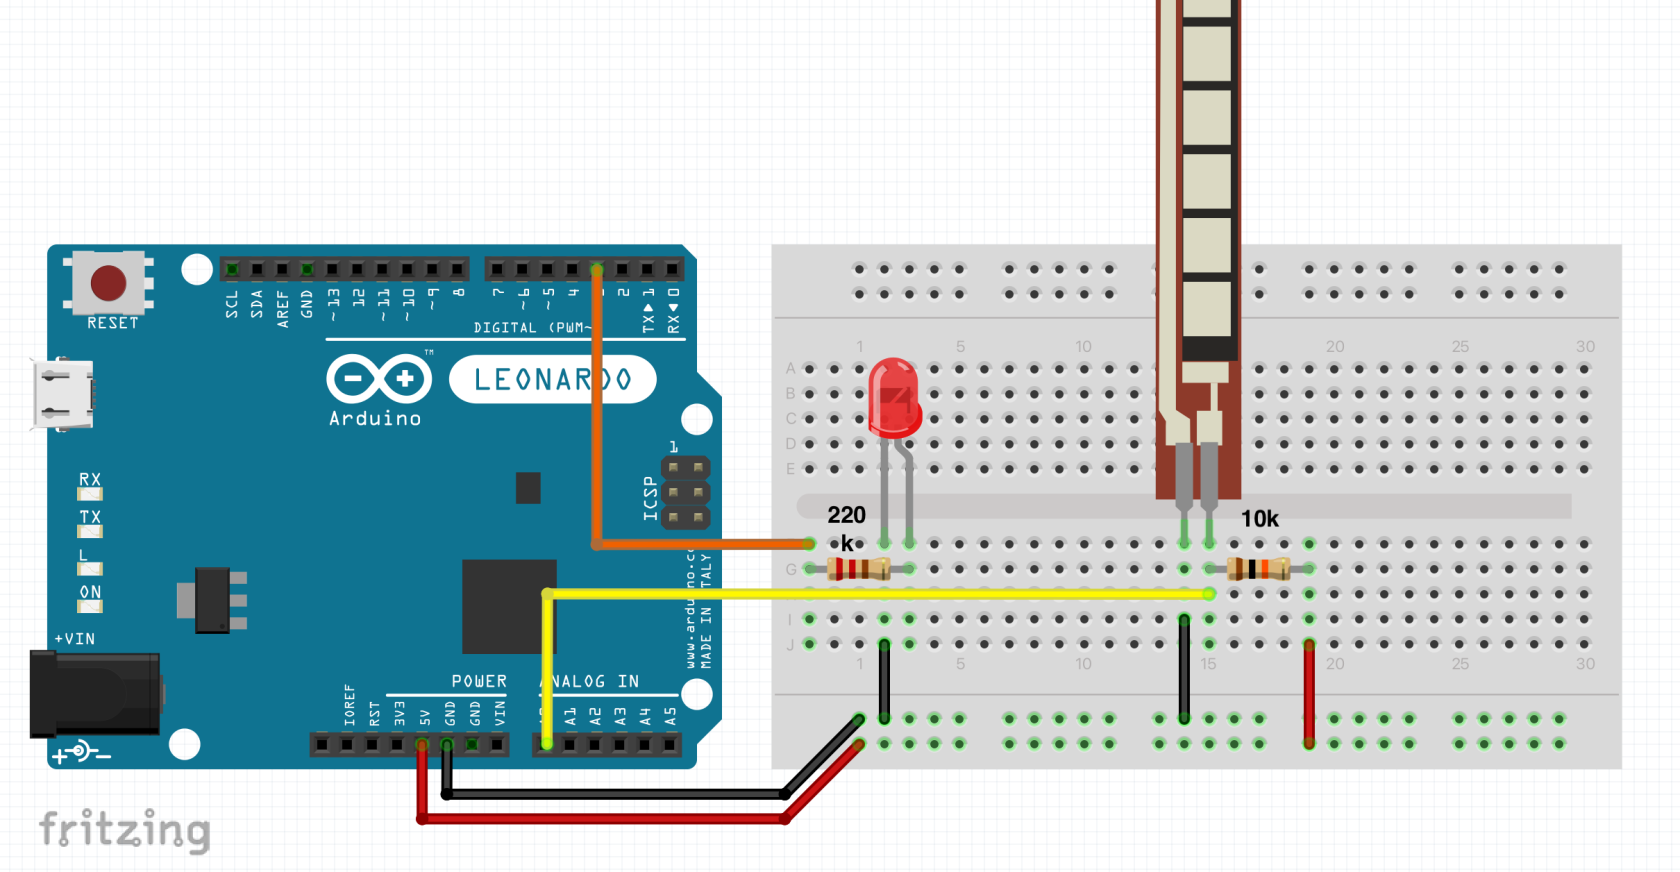 The images shows the wiring of a flex sensor and led on a breadbaord connected to the arduino leonardo